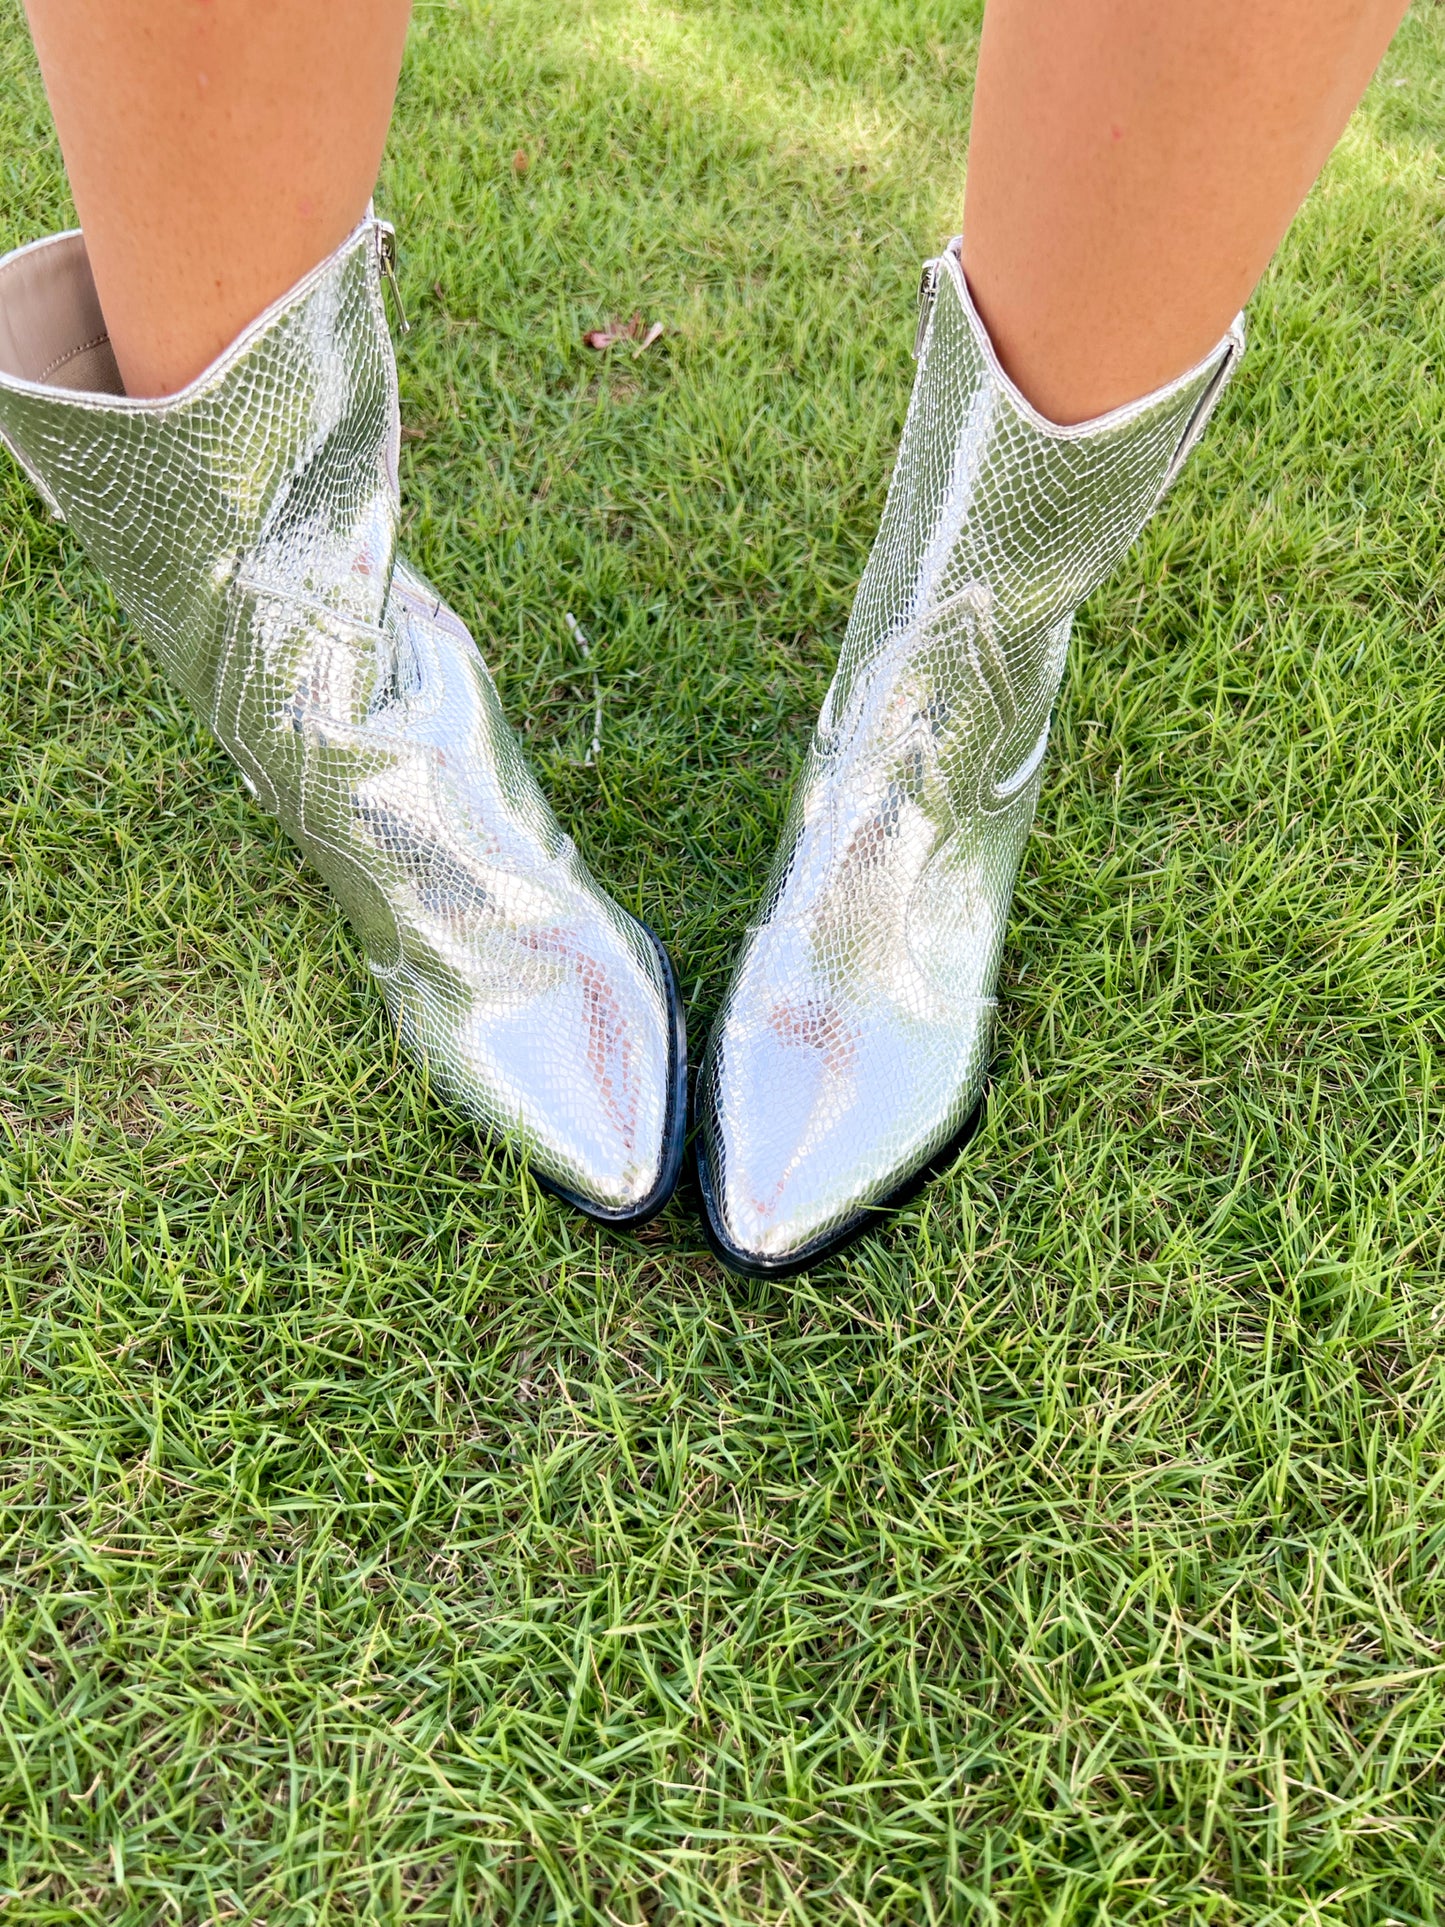 Silver Snake Boots